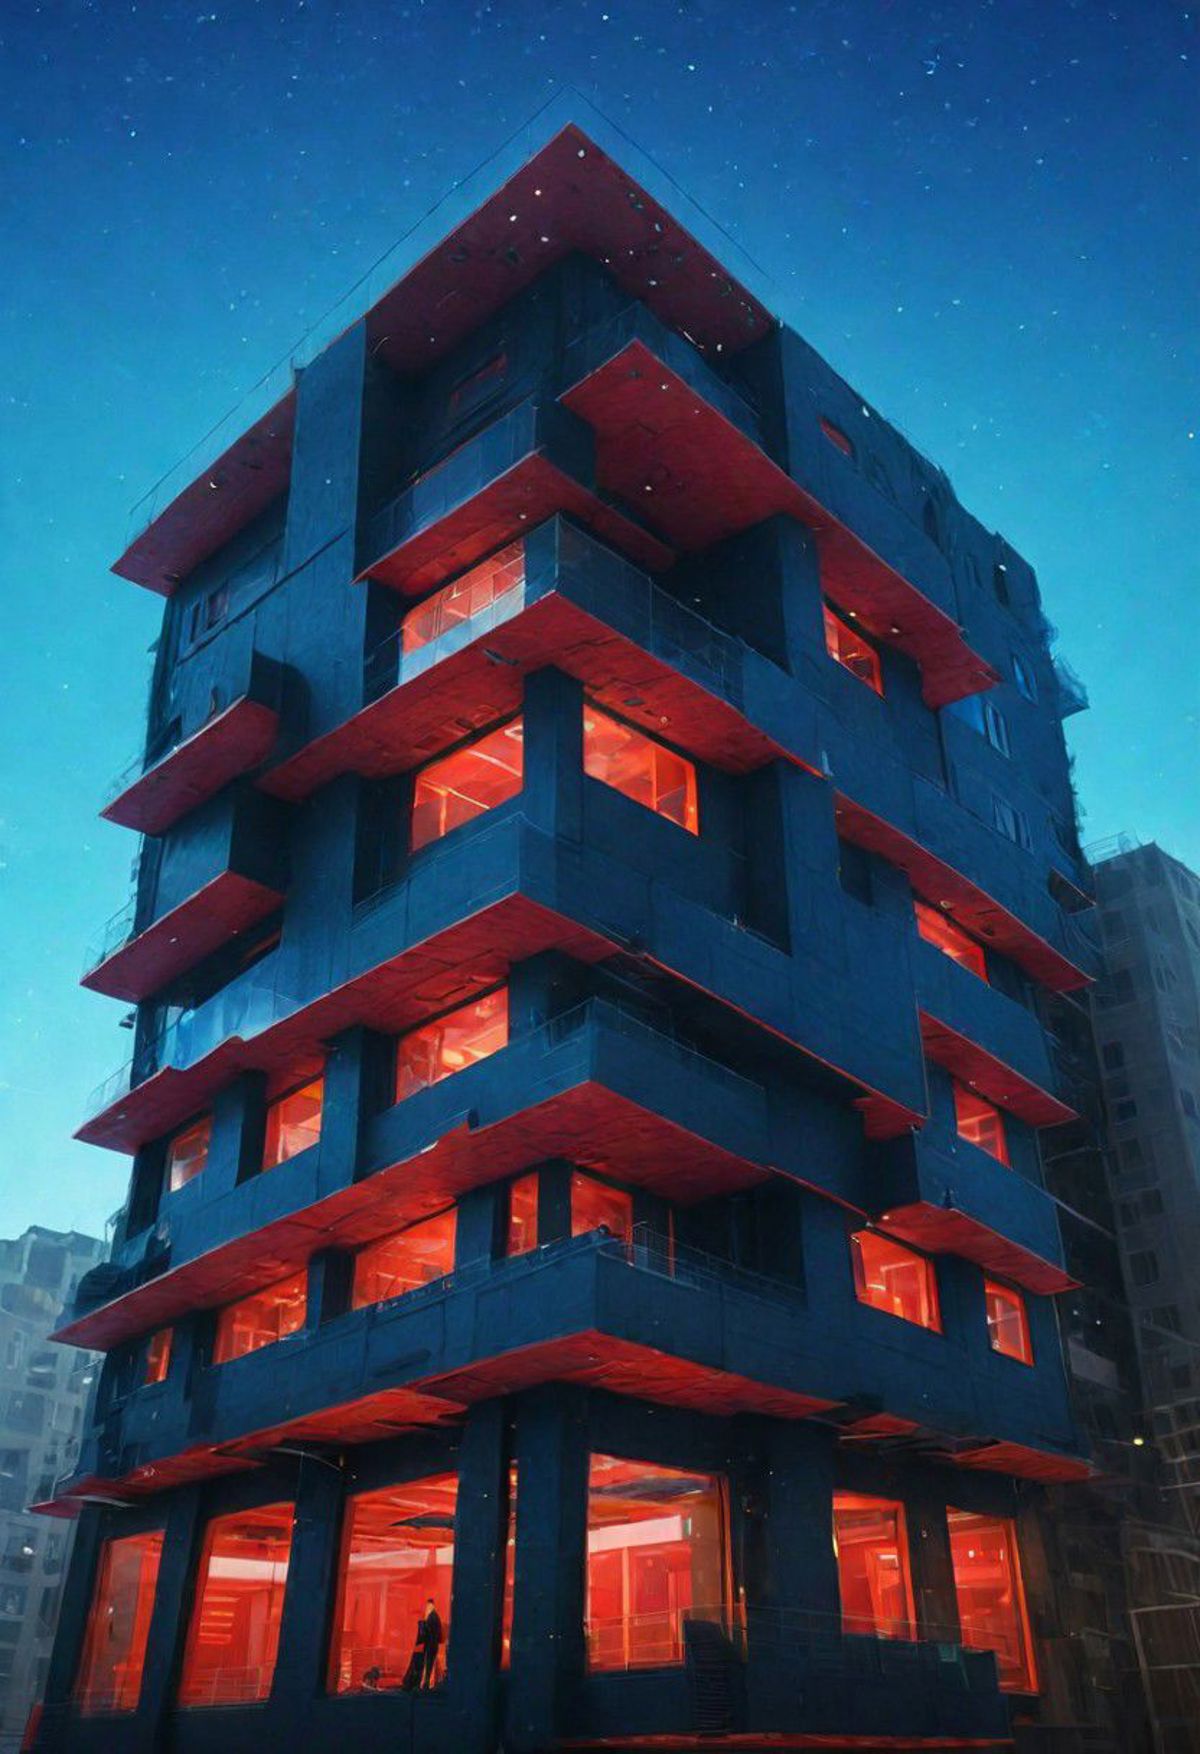 Tall Building with Red Lights on the Top Floor